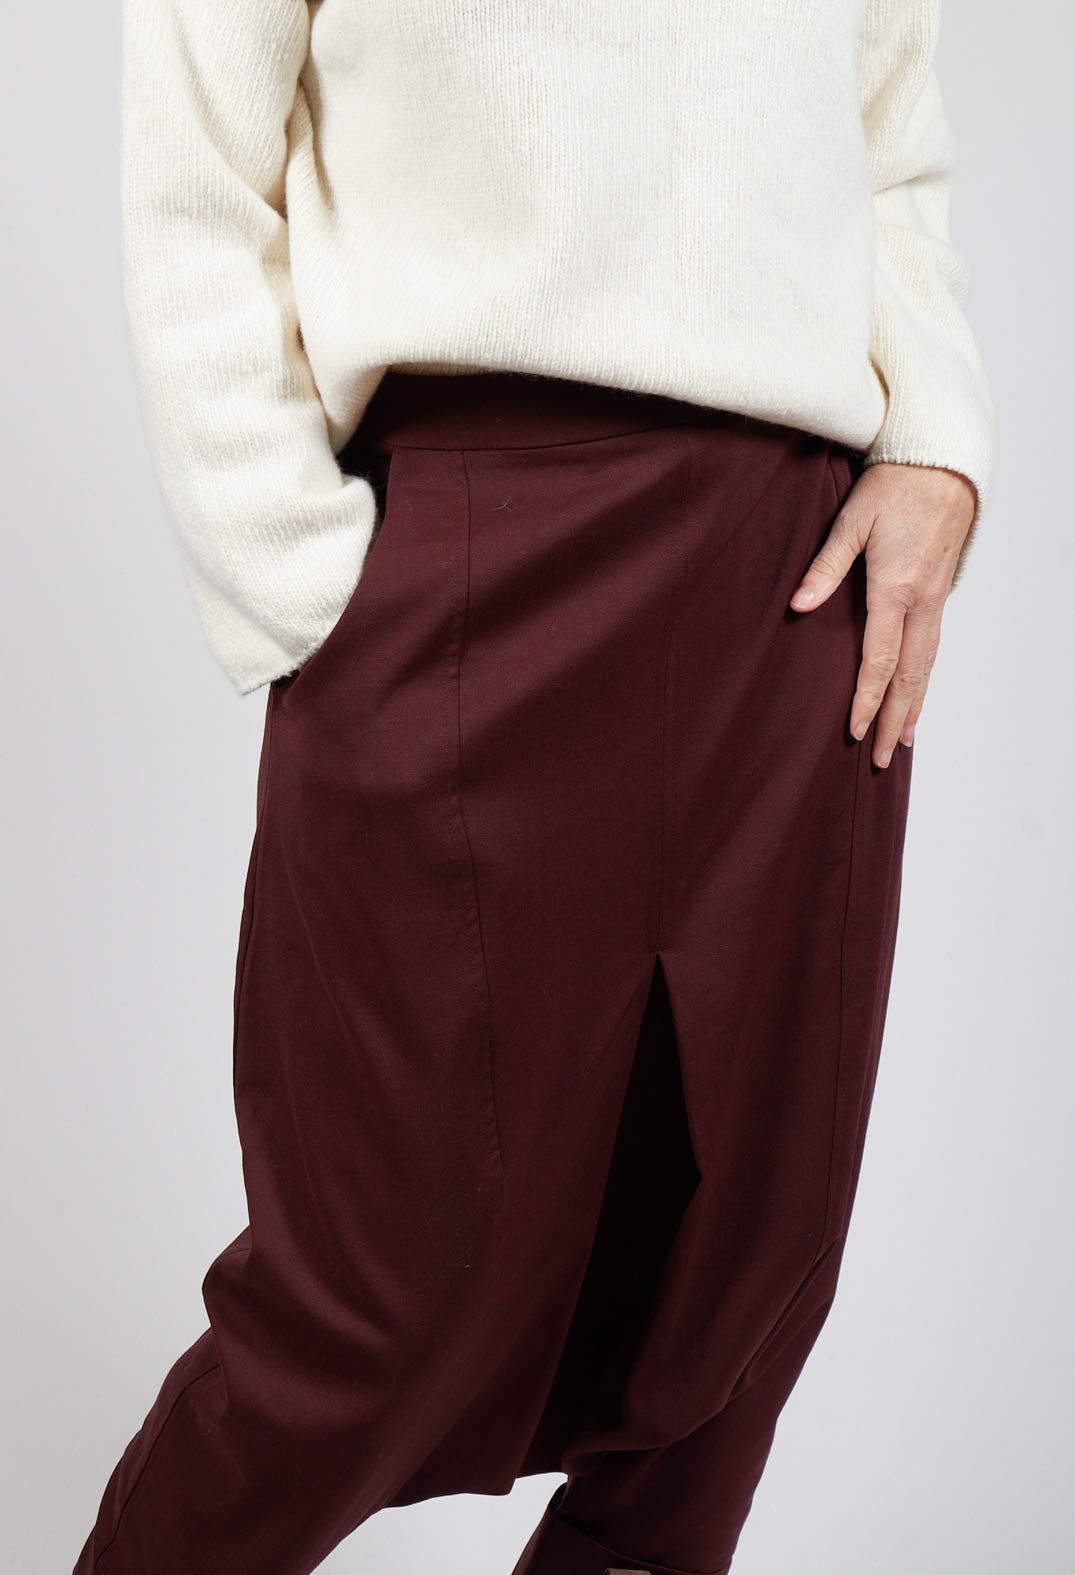 Drop Crotch Rolled Up Woven Trousers in Burgundy